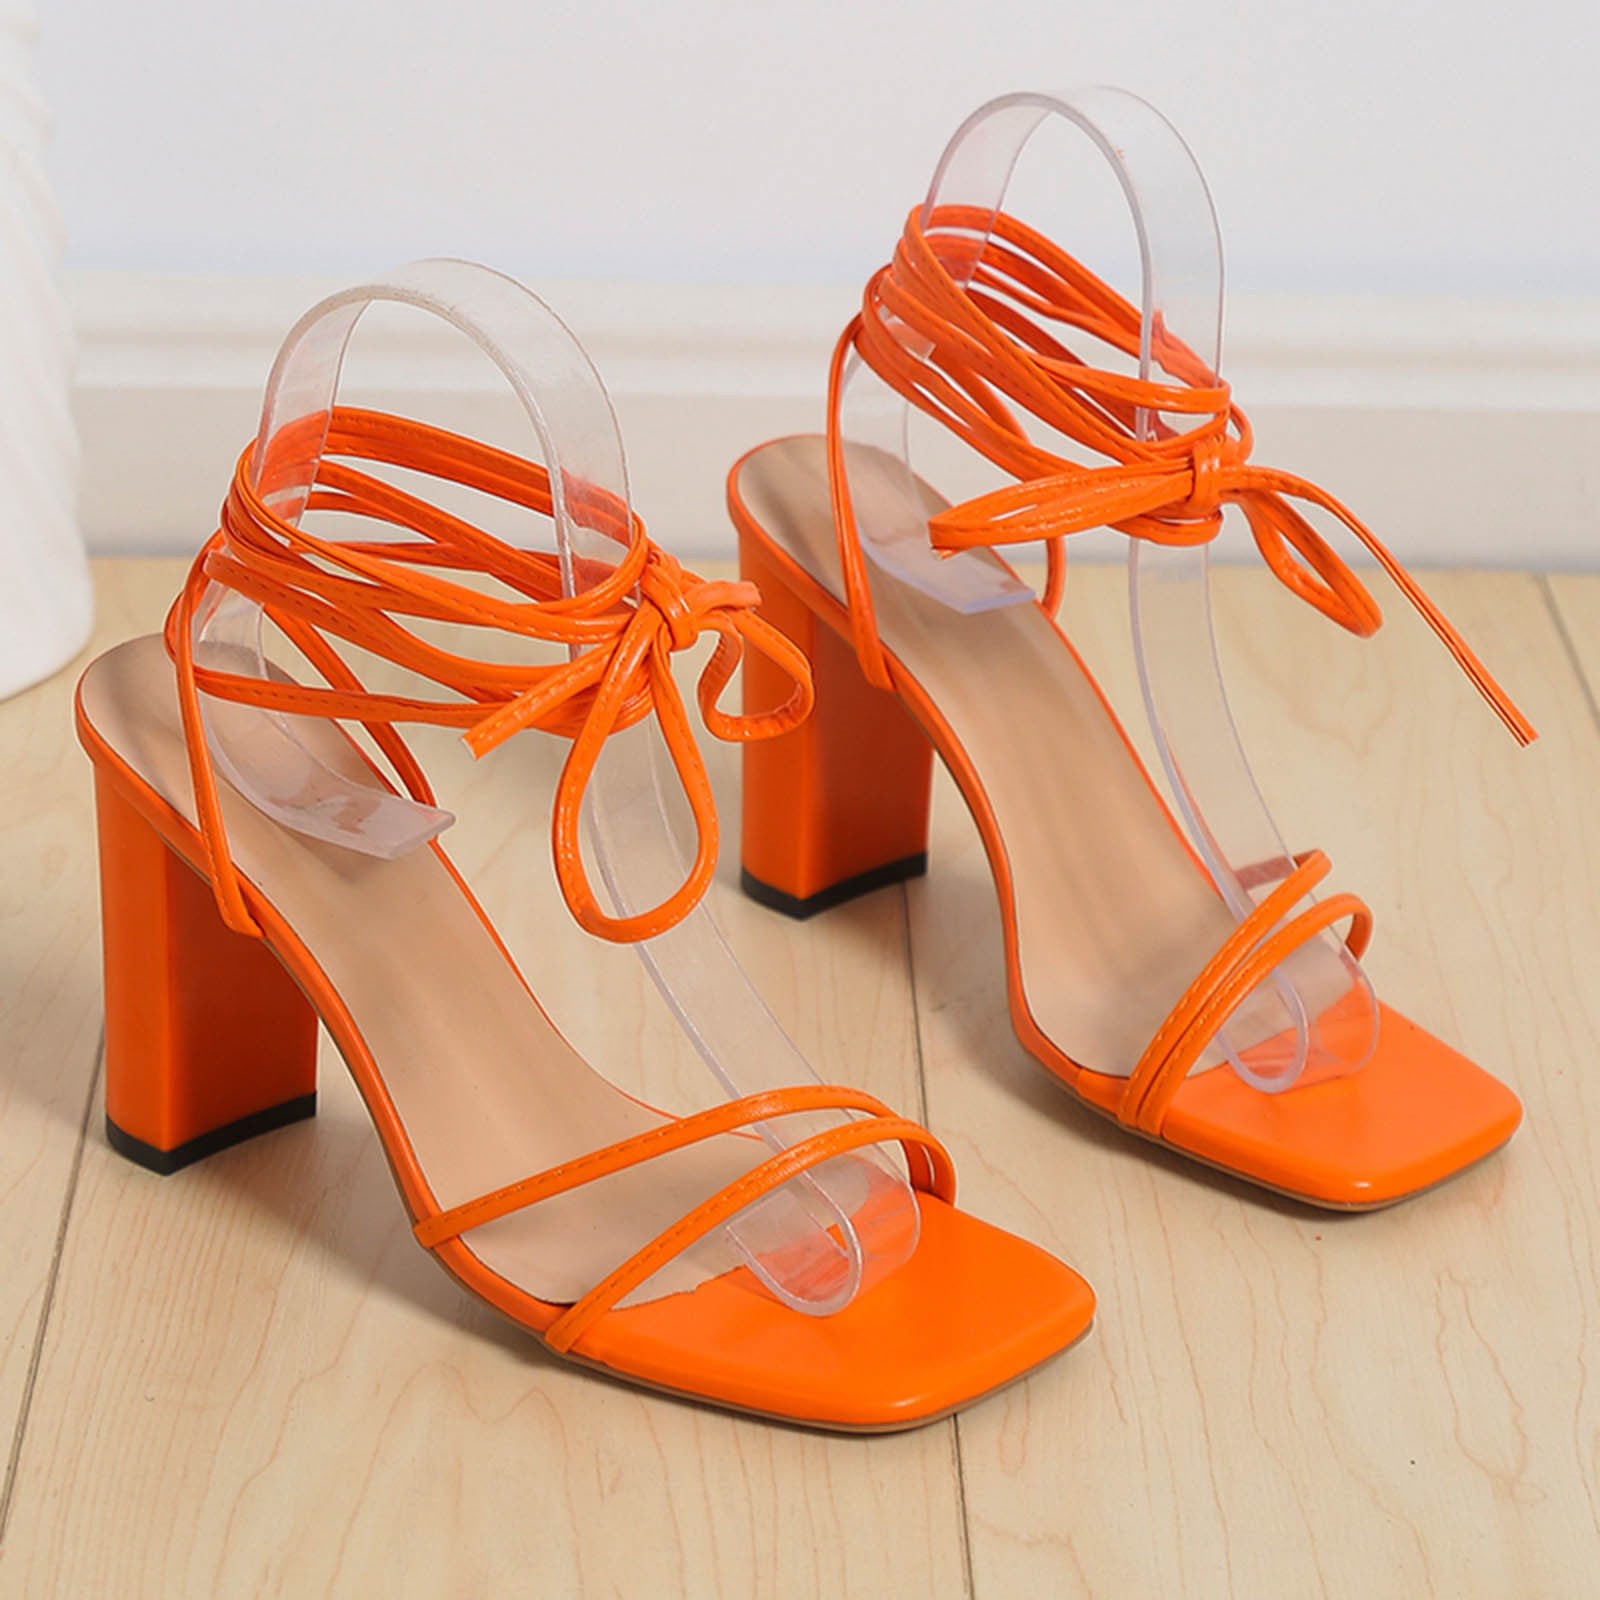 ASOS DESIGN Nina strappy tie leg heeled sandals in orange and pink mix -  ShopStyle